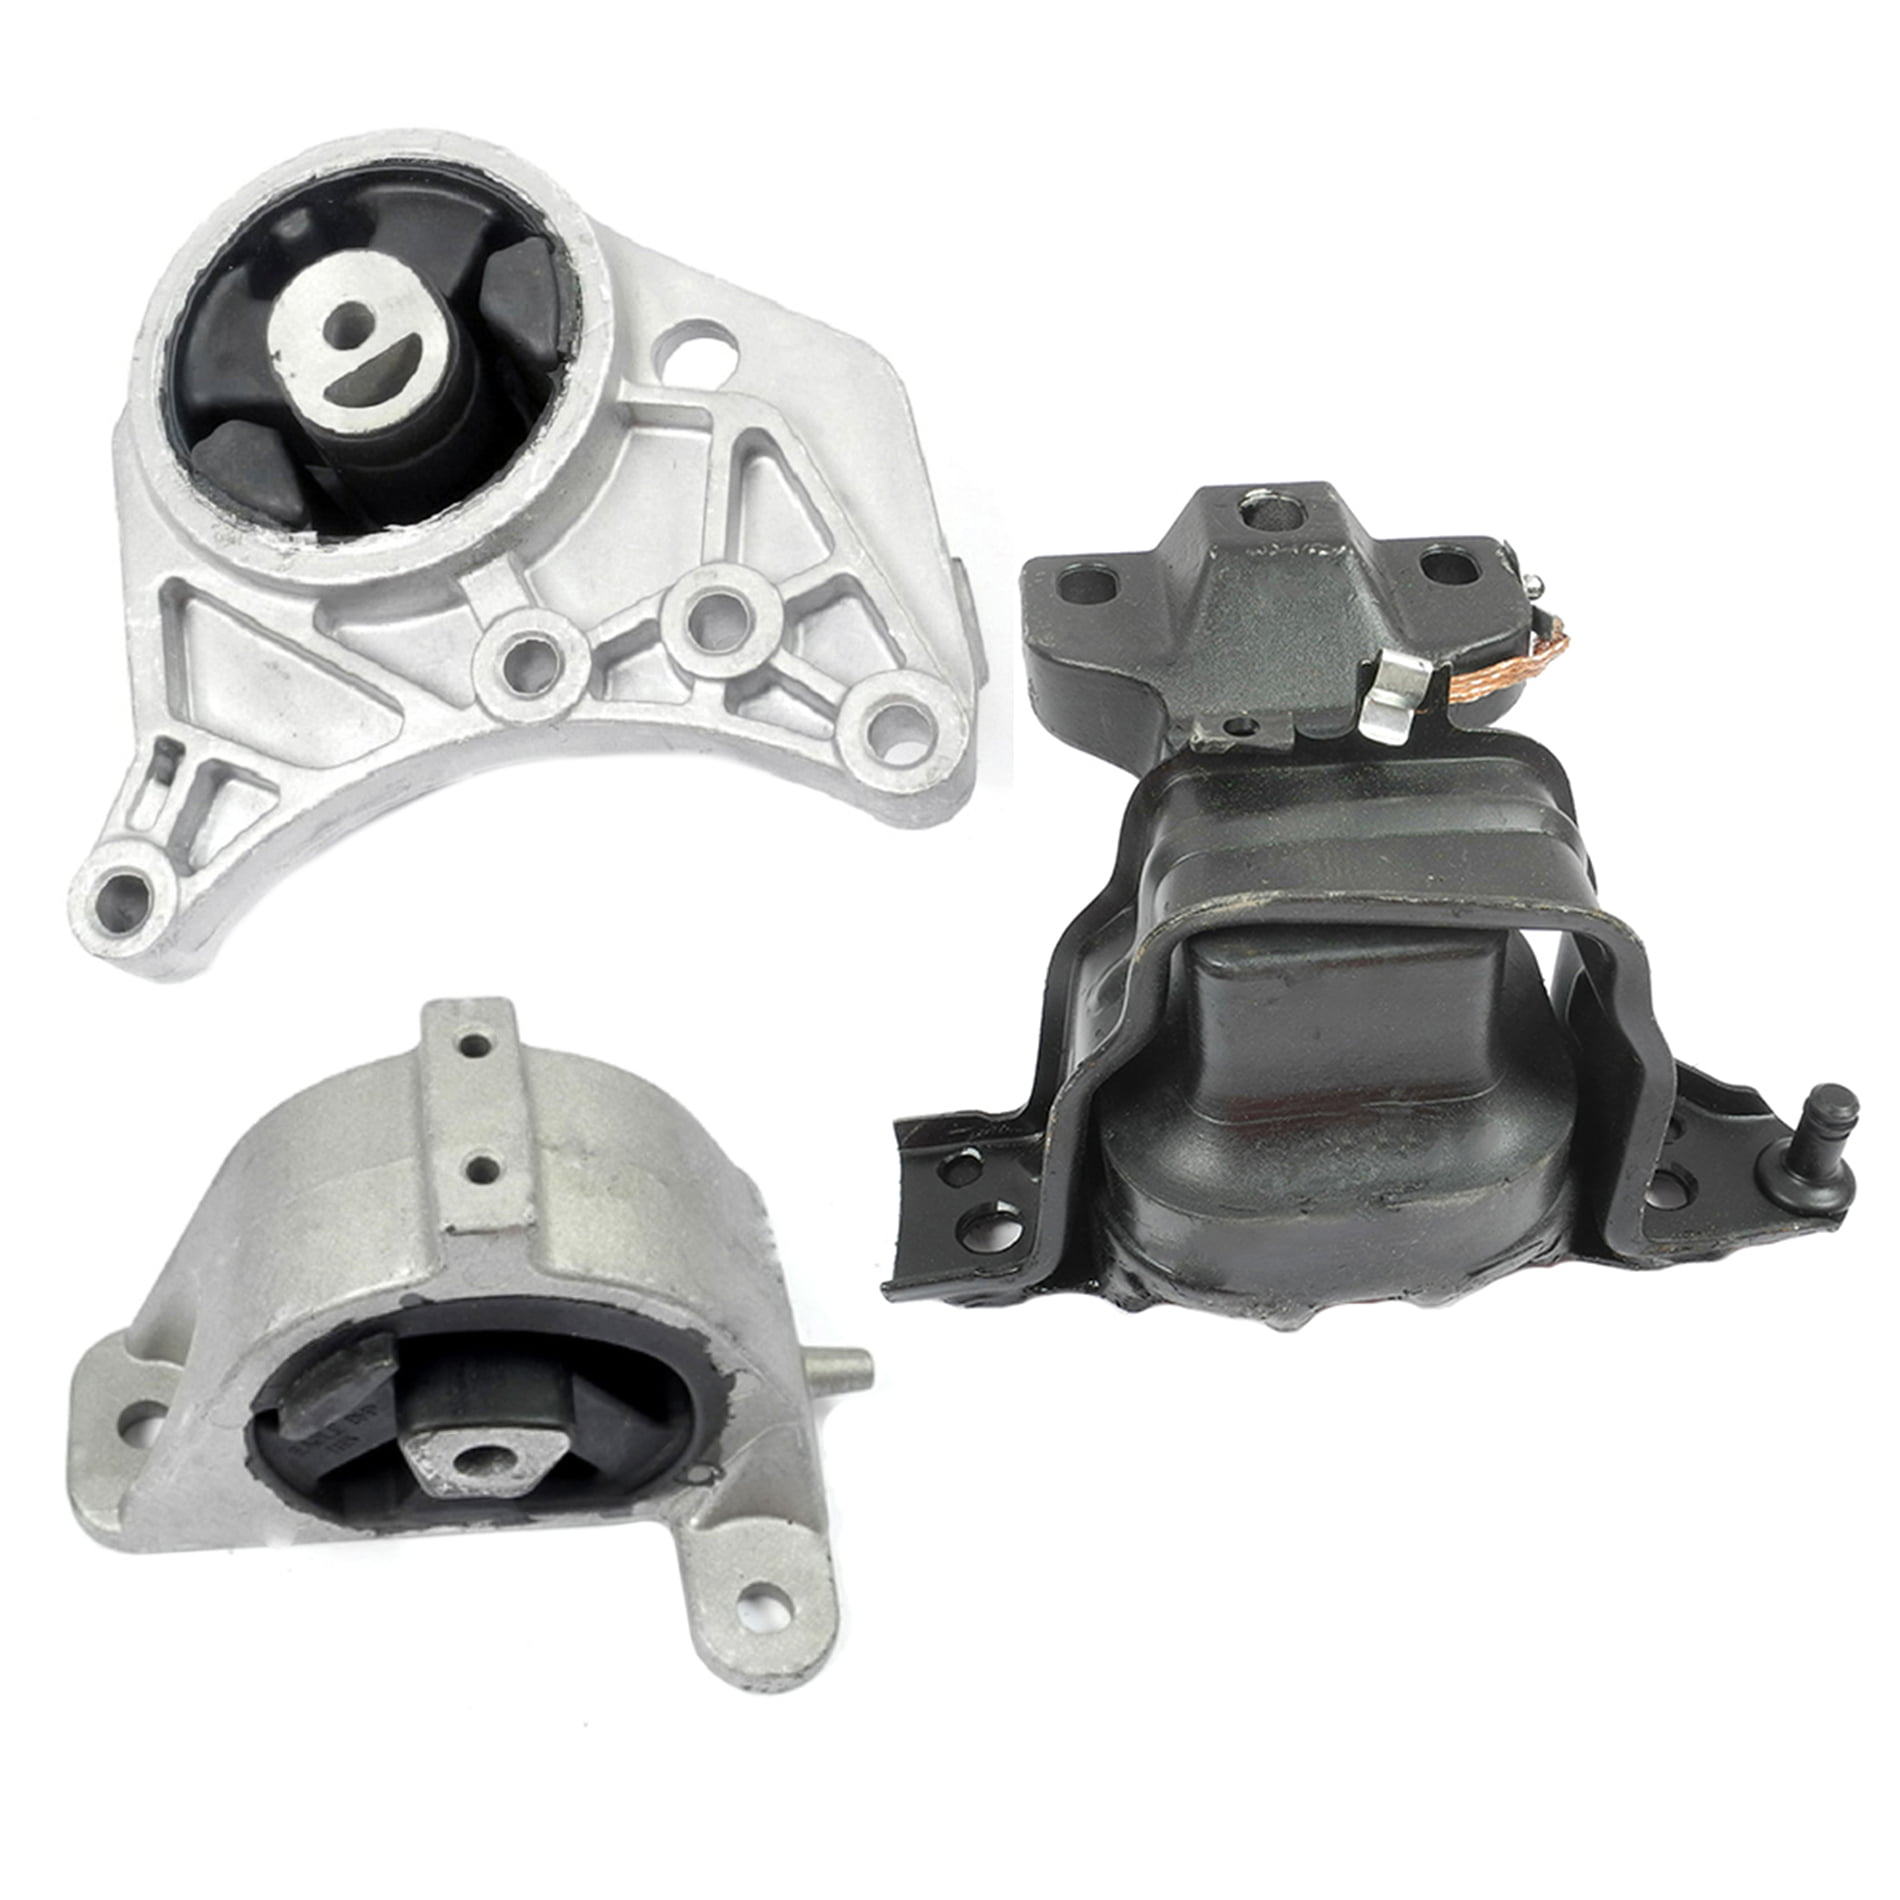 Engine Motor and Trans Mount Set of 4 for 2001-2007 Chrysler Dodge Compatible with A2926 A2928 A2925 A2927 ENA